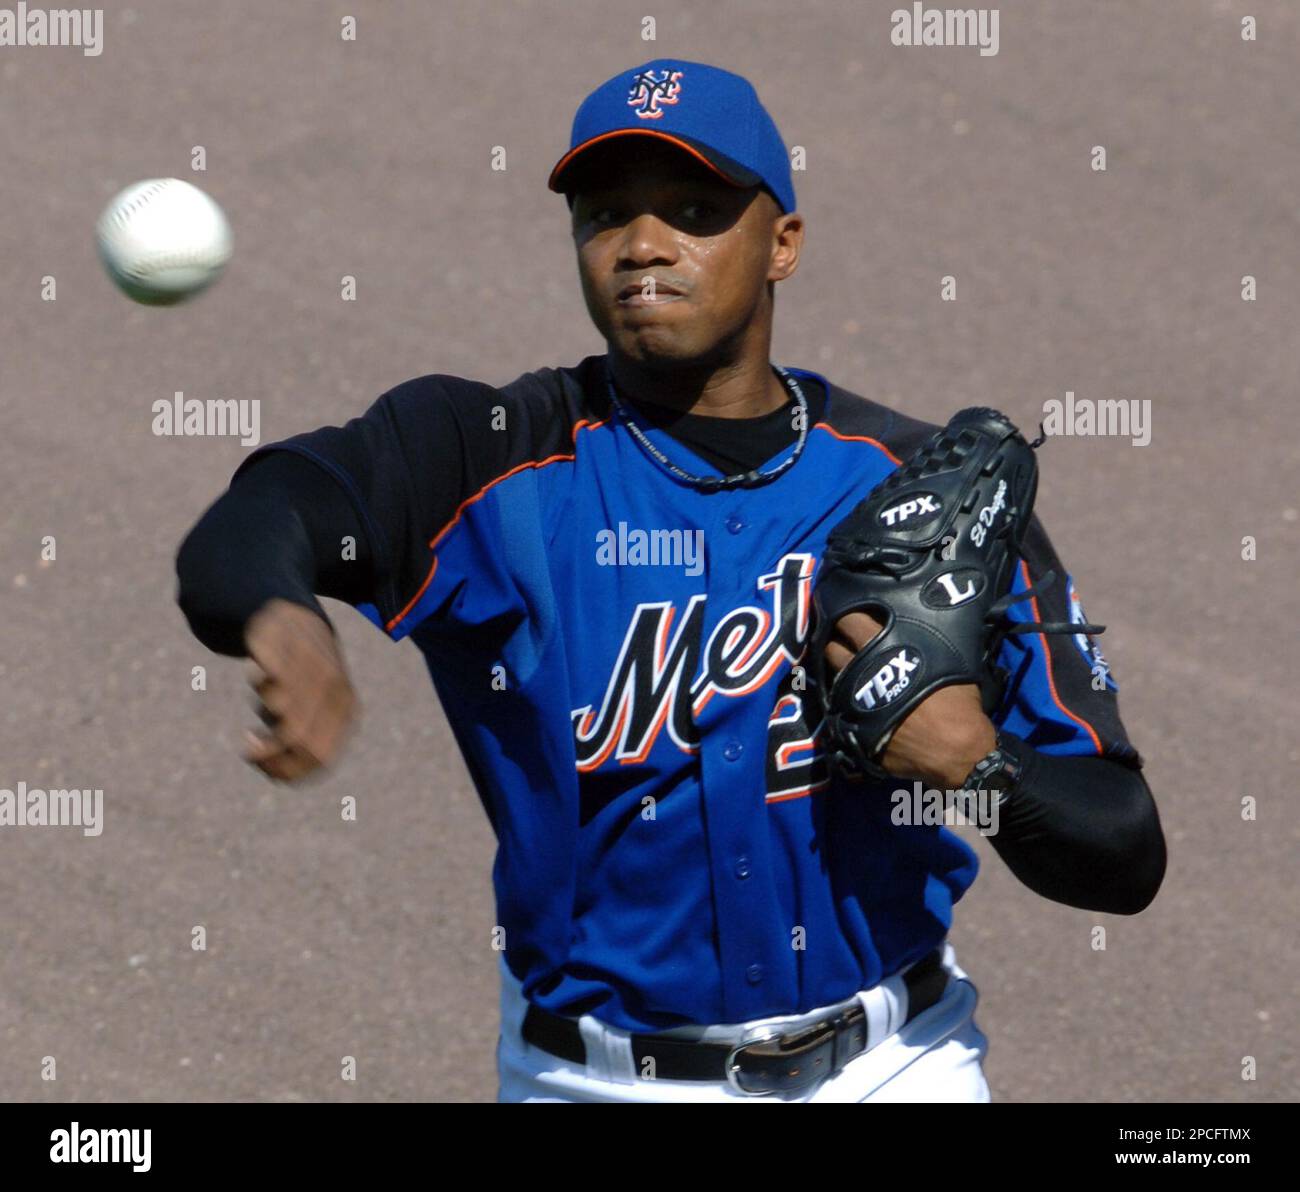 Orlando El Duque Hernandez throws during the Mets' workout one day before  their National League Division Series opener against the Los Angeles  Dodgers at Shea Stadium in New York, Tuesday, Oct. 3